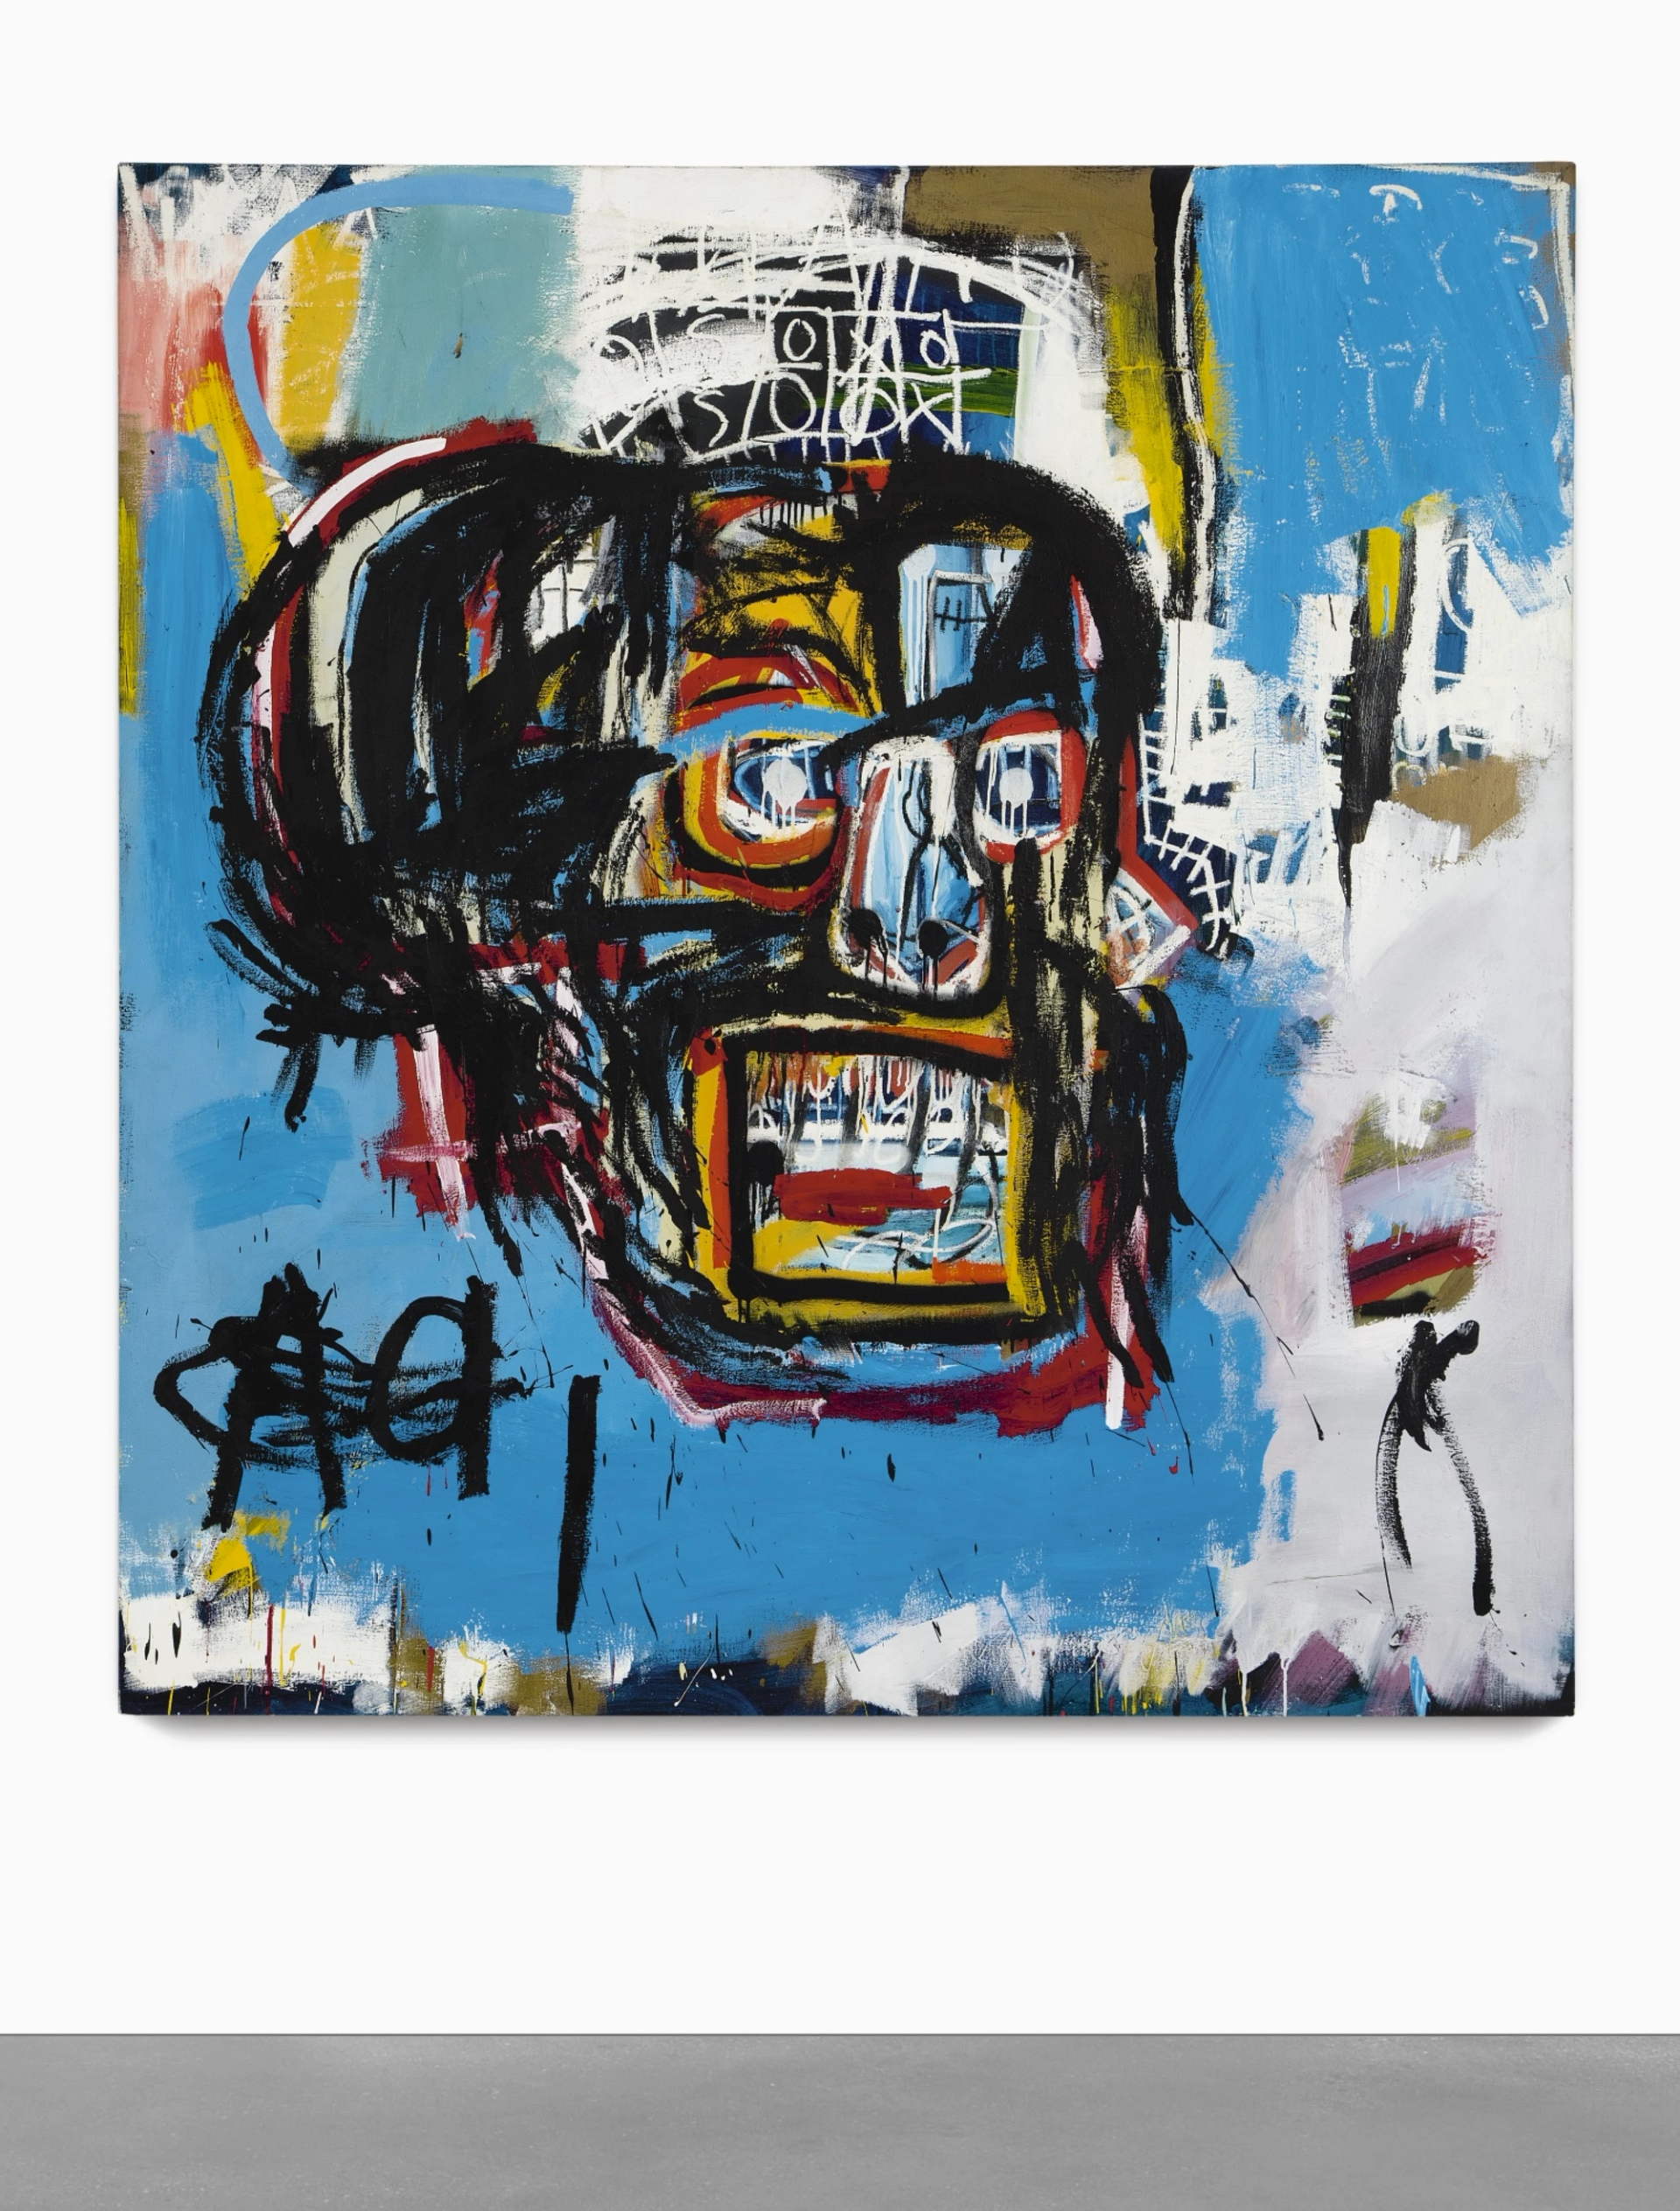 This artwork by Basquiat shows a large head, done in black lines, against a blue background.